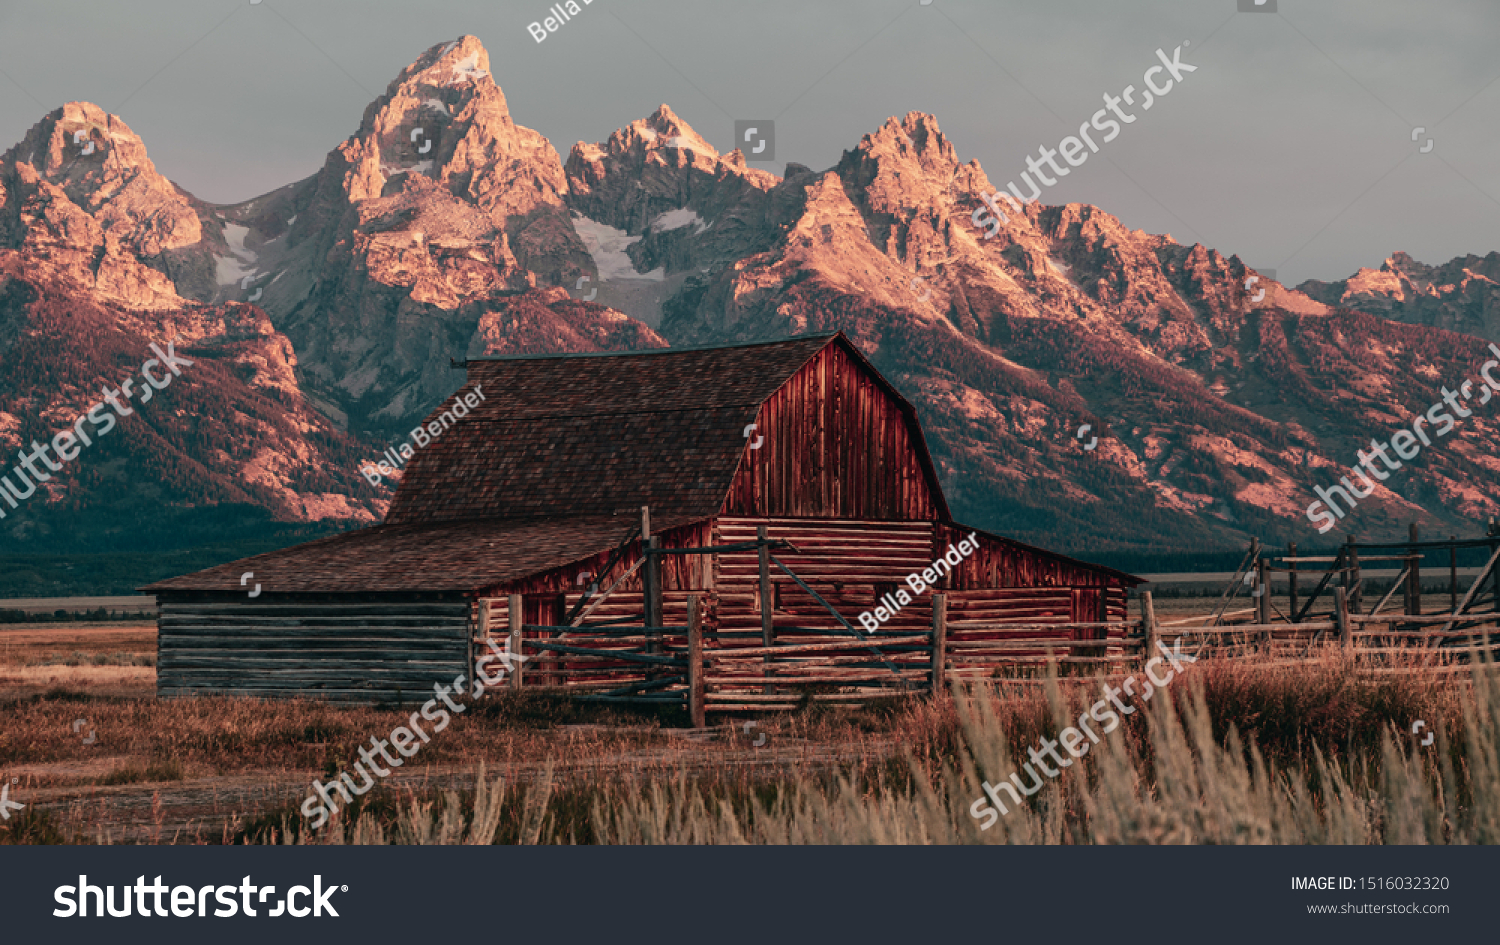 The Famous John Moulton Barn at sunrise in the Historic Mormon Row District of Grand Teton National Park, Wyoming, USA. Morning sunshine on the Teton Mountains in the background.  #1516032320